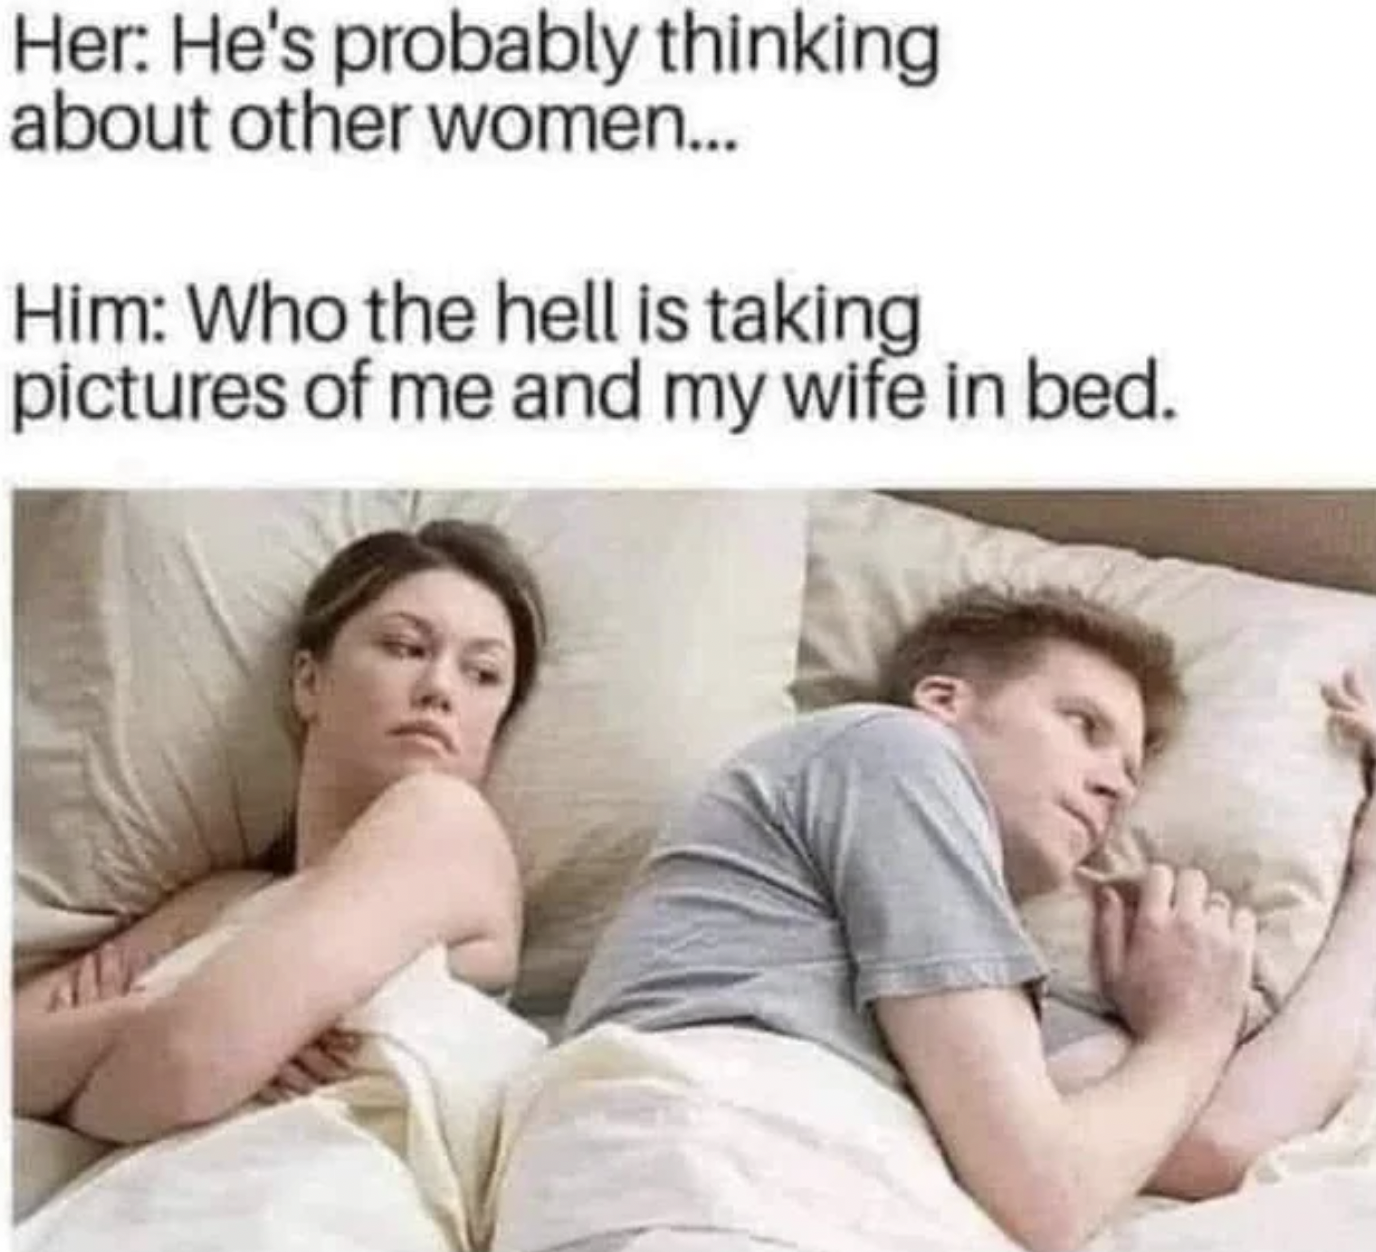 Memes that tell the truth - bet he's thinking about other women meme - Her He's probably thinking about other women... Him Who the hell is taking pictures of me and my wife in bed.